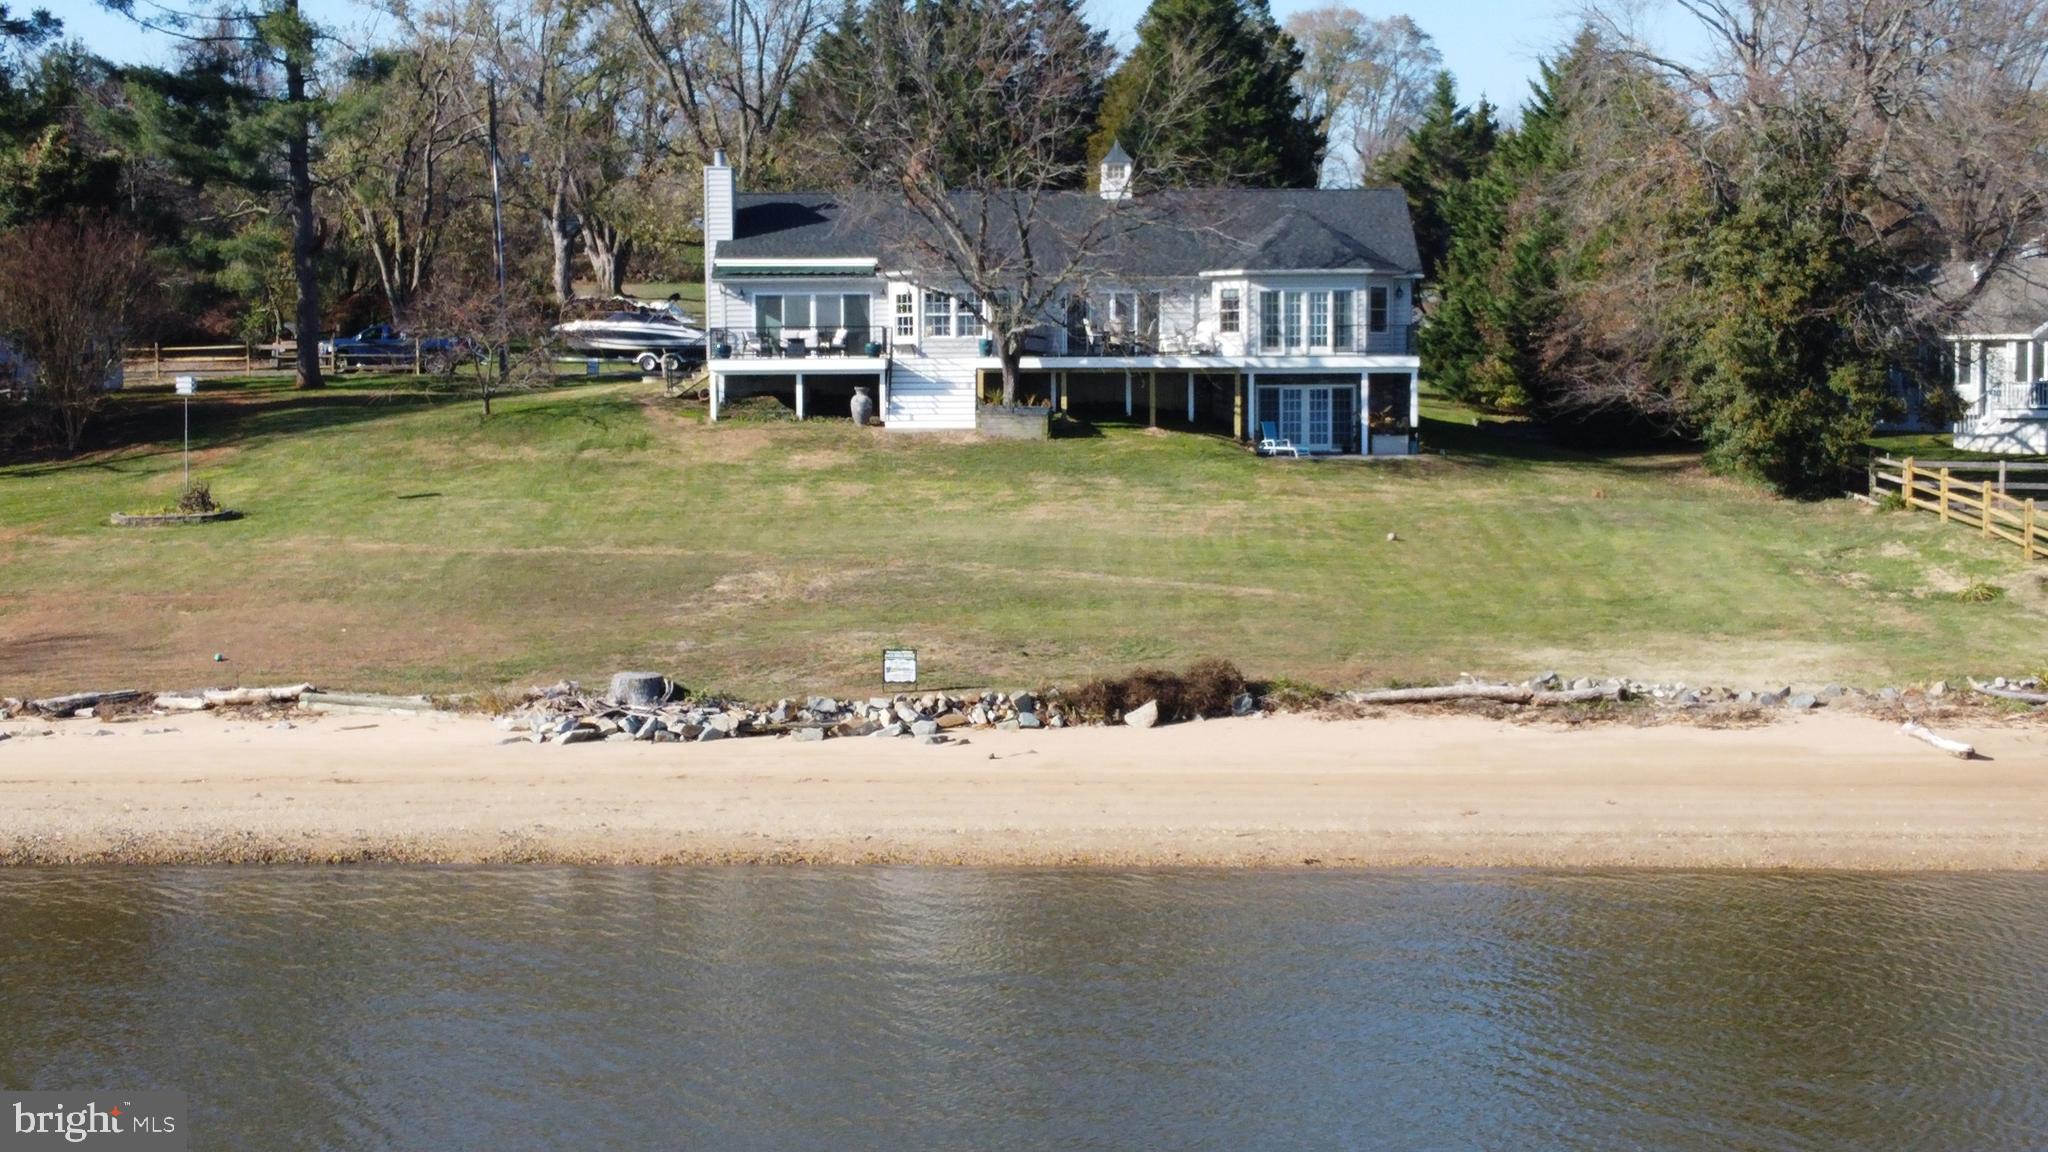 Wake up to the peace and tranquility that is 84 Bonney Shore Rd in Elkton. Arise each morning
to a d